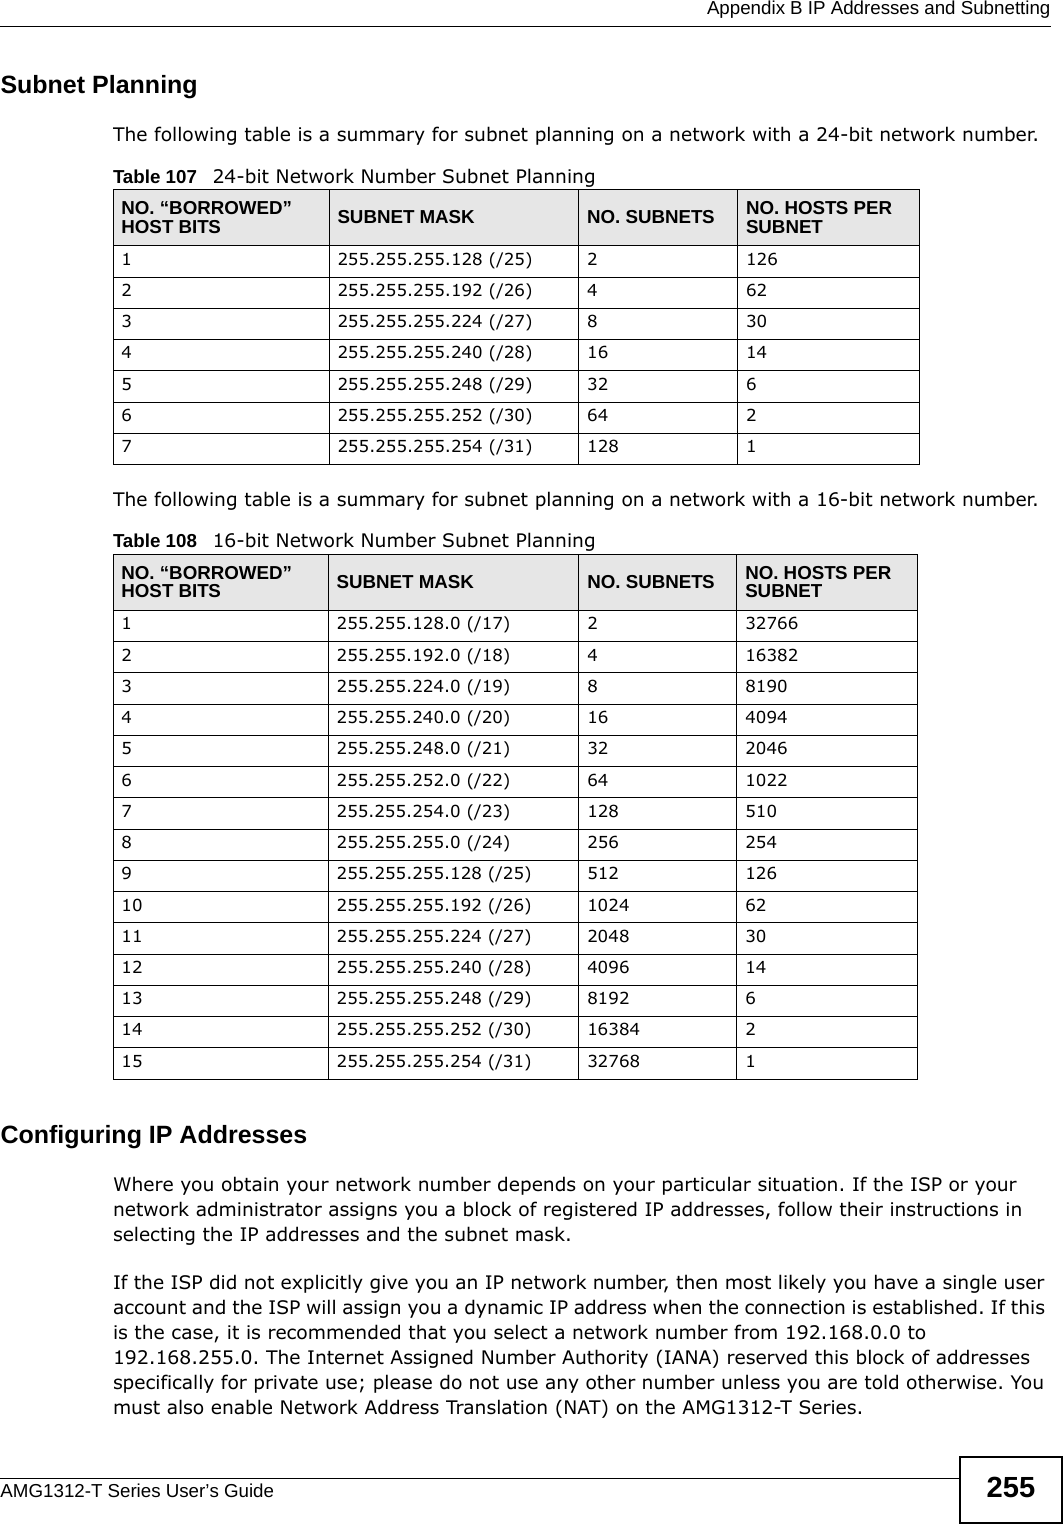  Appendix B IP Addresses and SubnettingAMG1312-T Series User’s Guide 255Subnet PlanningThe following table is a summary for subnet planning on a network with a 24-bit network number.The following table is a summary for subnet planning on a network with a 16-bit network number. Configuring IP AddressesWhere you obtain your network number depends on your particular situation. If the ISP or your network administrator assigns you a block of registered IP addresses, follow their instructions in selecting the IP addresses and the subnet mask.If the ISP did not explicitly give you an IP network number, then most likely you have a single user account and the ISP will assign you a dynamic IP address when the connection is established. If this is the case, it is recommended that you select a network number from 192.168.0.0 to 192.168.255.0. The Internet Assigned Number Authority (IANA) reserved this block of addresses specifically for private use; please do not use any other number unless you are told otherwise. You must also enable Network Address Translation (NAT) on the AMG1312-T Series. Table 107   24-bit Network Number Subnet PlanningNO. “BORROWED” HOST BITS SUBNET MASK NO. SUBNETS NO. HOSTS PER SUBNET1255.255.255.128 (/25) 21262255.255.255.192 (/26) 4623255.255.255.224 (/27) 8304255.255.255.240 (/28) 16 145255.255.255.248 (/29) 32 66255.255.255.252 (/30) 64 27255.255.255.254 (/31) 128 1Table 108   16-bit Network Number Subnet PlanningNO. “BORROWED” HOST BITS SUBNET MASK NO. SUBNETS NO. HOSTS PER SUBNET1255.255.128.0 (/17) 2327662255.255.192.0 (/18) 4163823255.255.224.0 (/19) 881904255.255.240.0 (/20) 16 40945255.255.248.0 (/21) 32 20466255.255.252.0 (/22) 64 10227255.255.254.0 (/23) 128 5108255.255.255.0 (/24) 256 2549255.255.255.128 (/25) 512 12610 255.255.255.192 (/26) 1024 6211 255.255.255.224 (/27) 2048 3012 255.255.255.240 (/28) 4096 1413 255.255.255.248 (/29) 8192 614 255.255.255.252 (/30) 16384 215 255.255.255.254 (/31) 32768 1